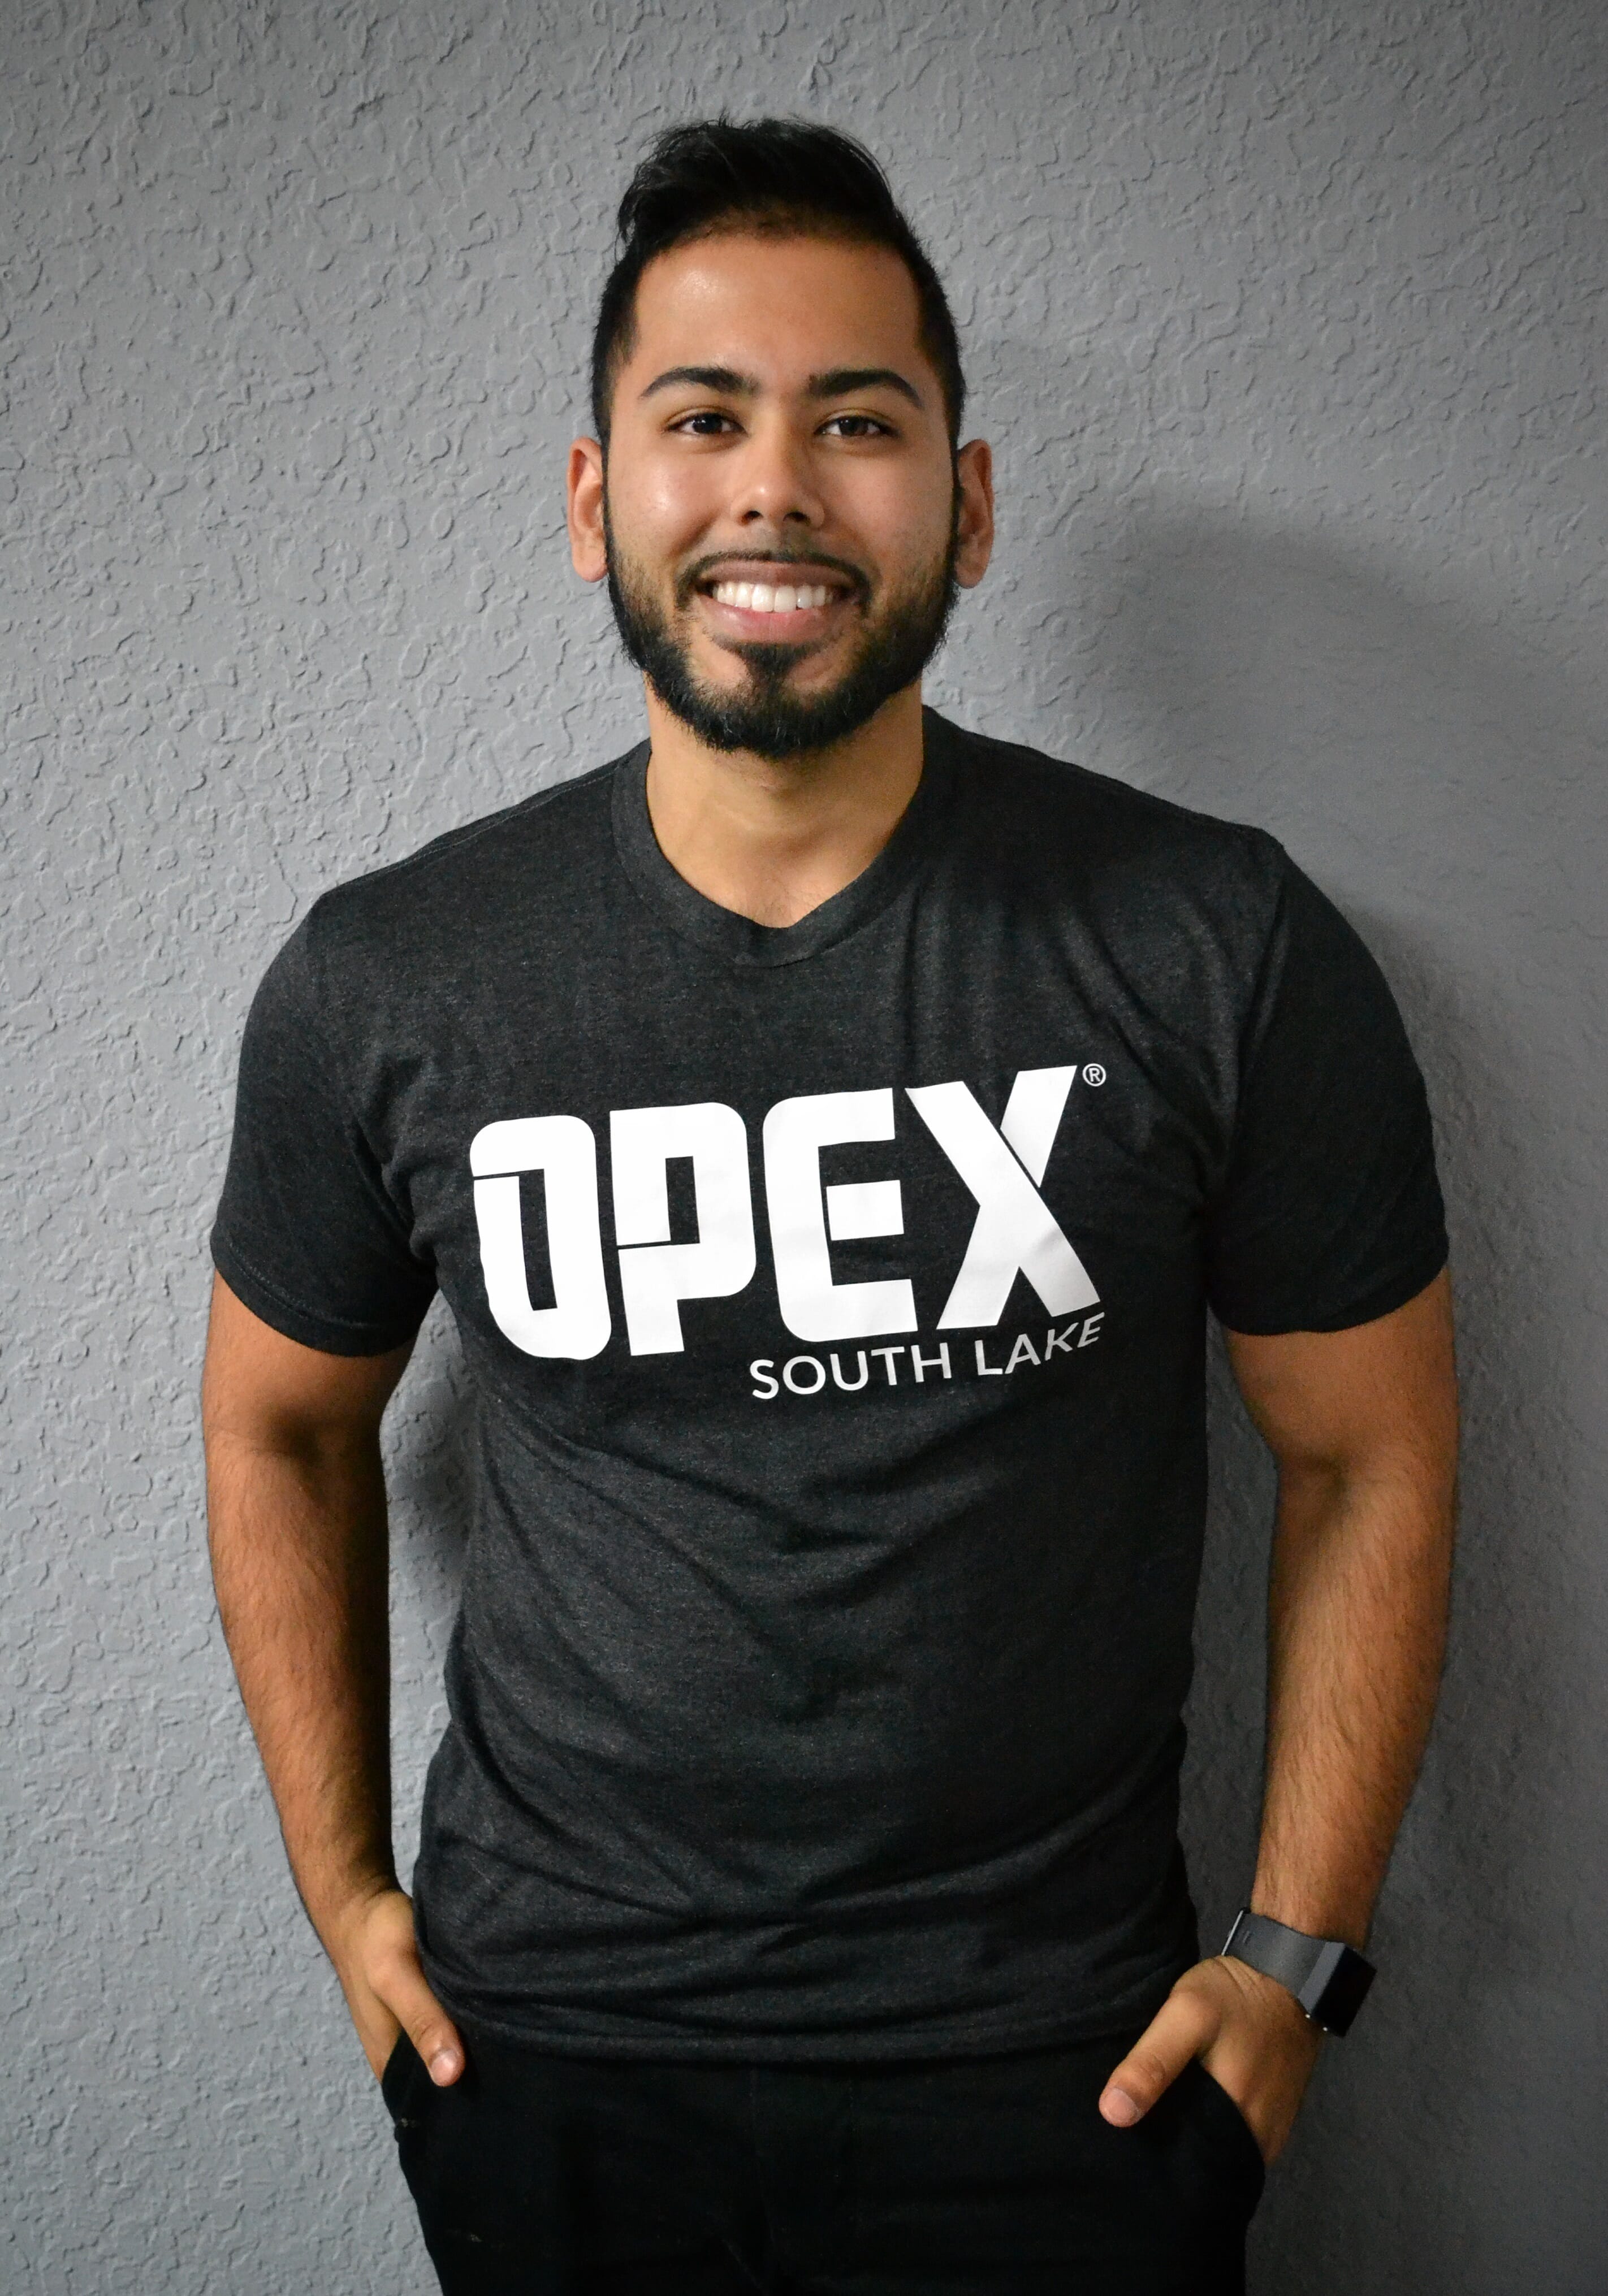 OPEX South Lake | Steven Bacchus / Floor Coach / Personal Trainer